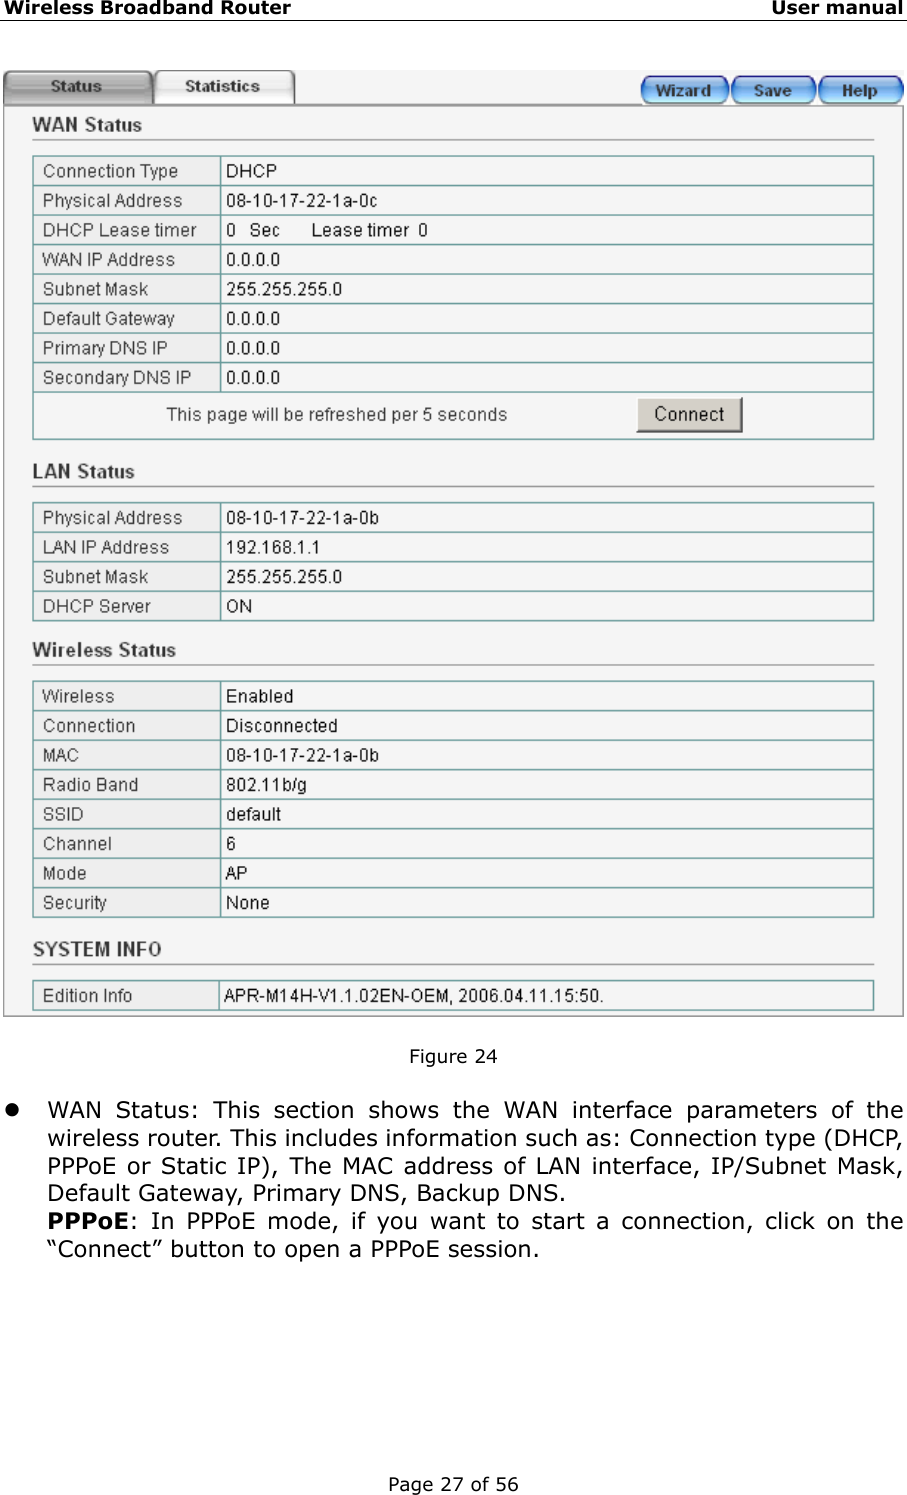 Wireless Broadband Router                                                   User manual Page 27 of 56   Figure 24  z WAN Status: This section shows the WAN interface parameters of the wireless router. This includes information such as: Connection type (DHCP, PPPoE or Static IP), The MAC address of LAN interface, IP/Subnet Mask, Default Gateway, Primary DNS, Backup DNS. PPPoE: In PPPoE mode, if you want to start a connection, click on the “Connect” button to open a PPPoE session.   